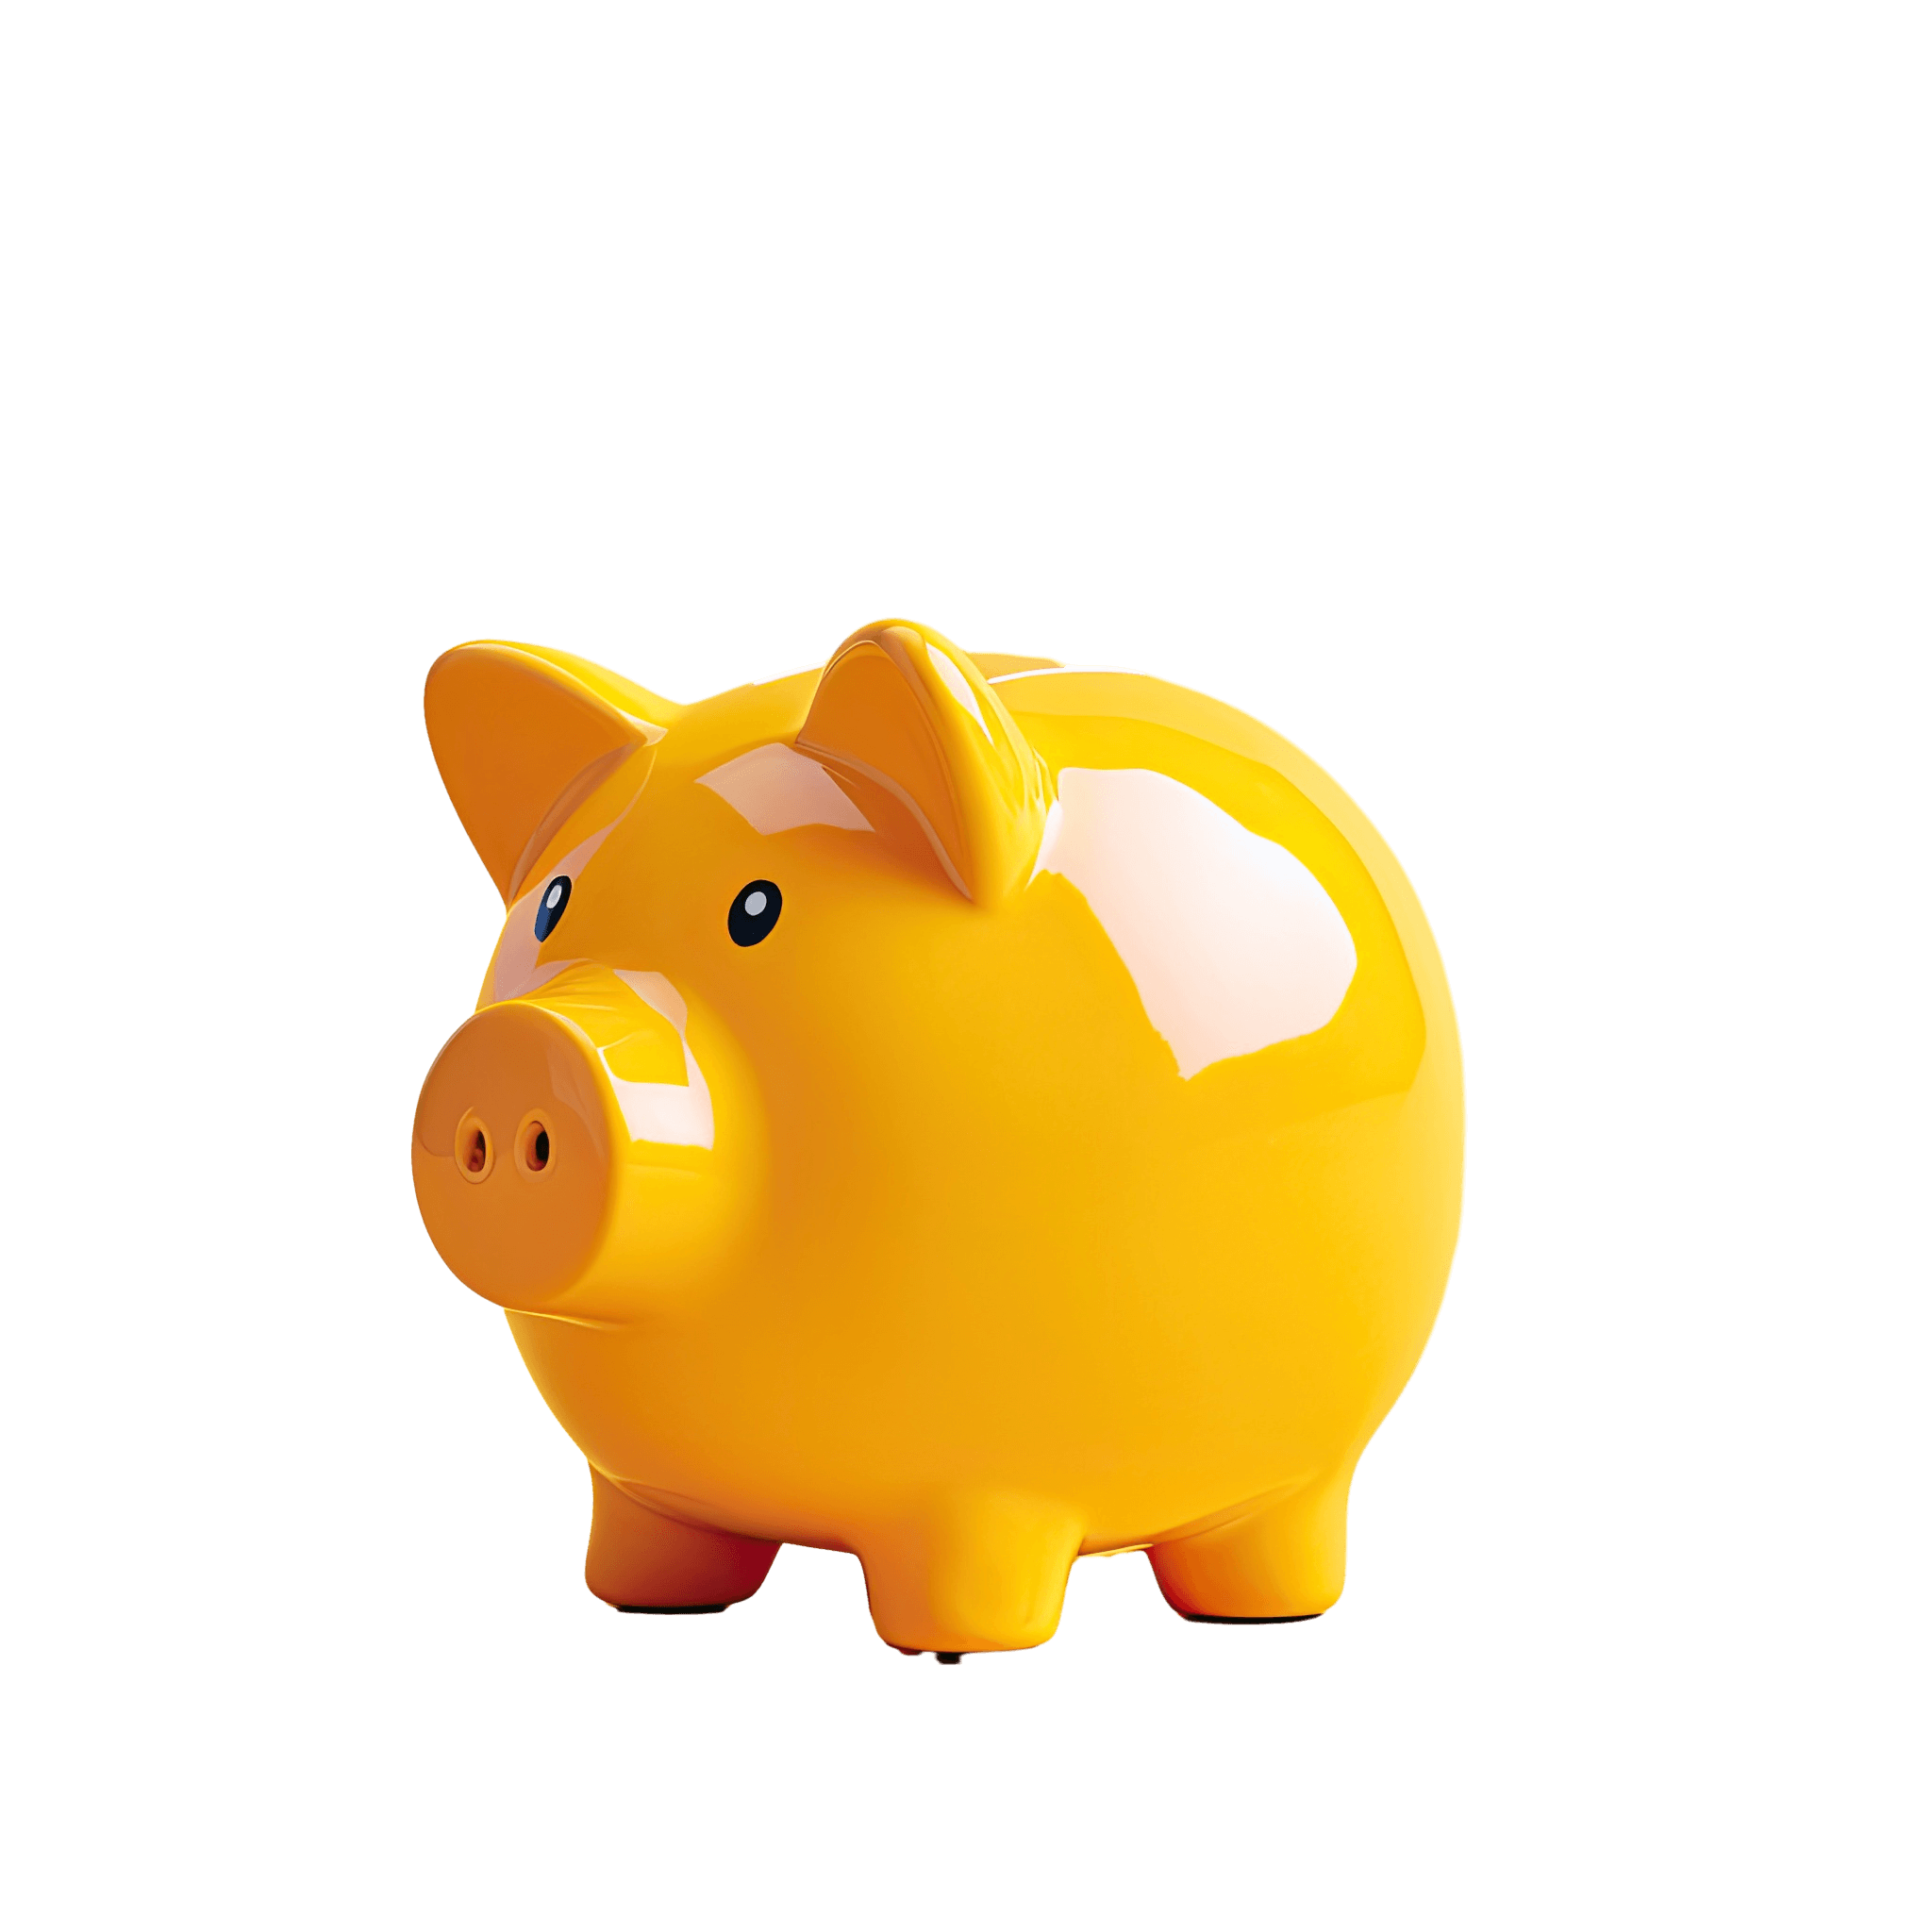 The image is of a yellow piggy bank in reference to saving money through Gilabit's affordable Web Design packages or memberships. 